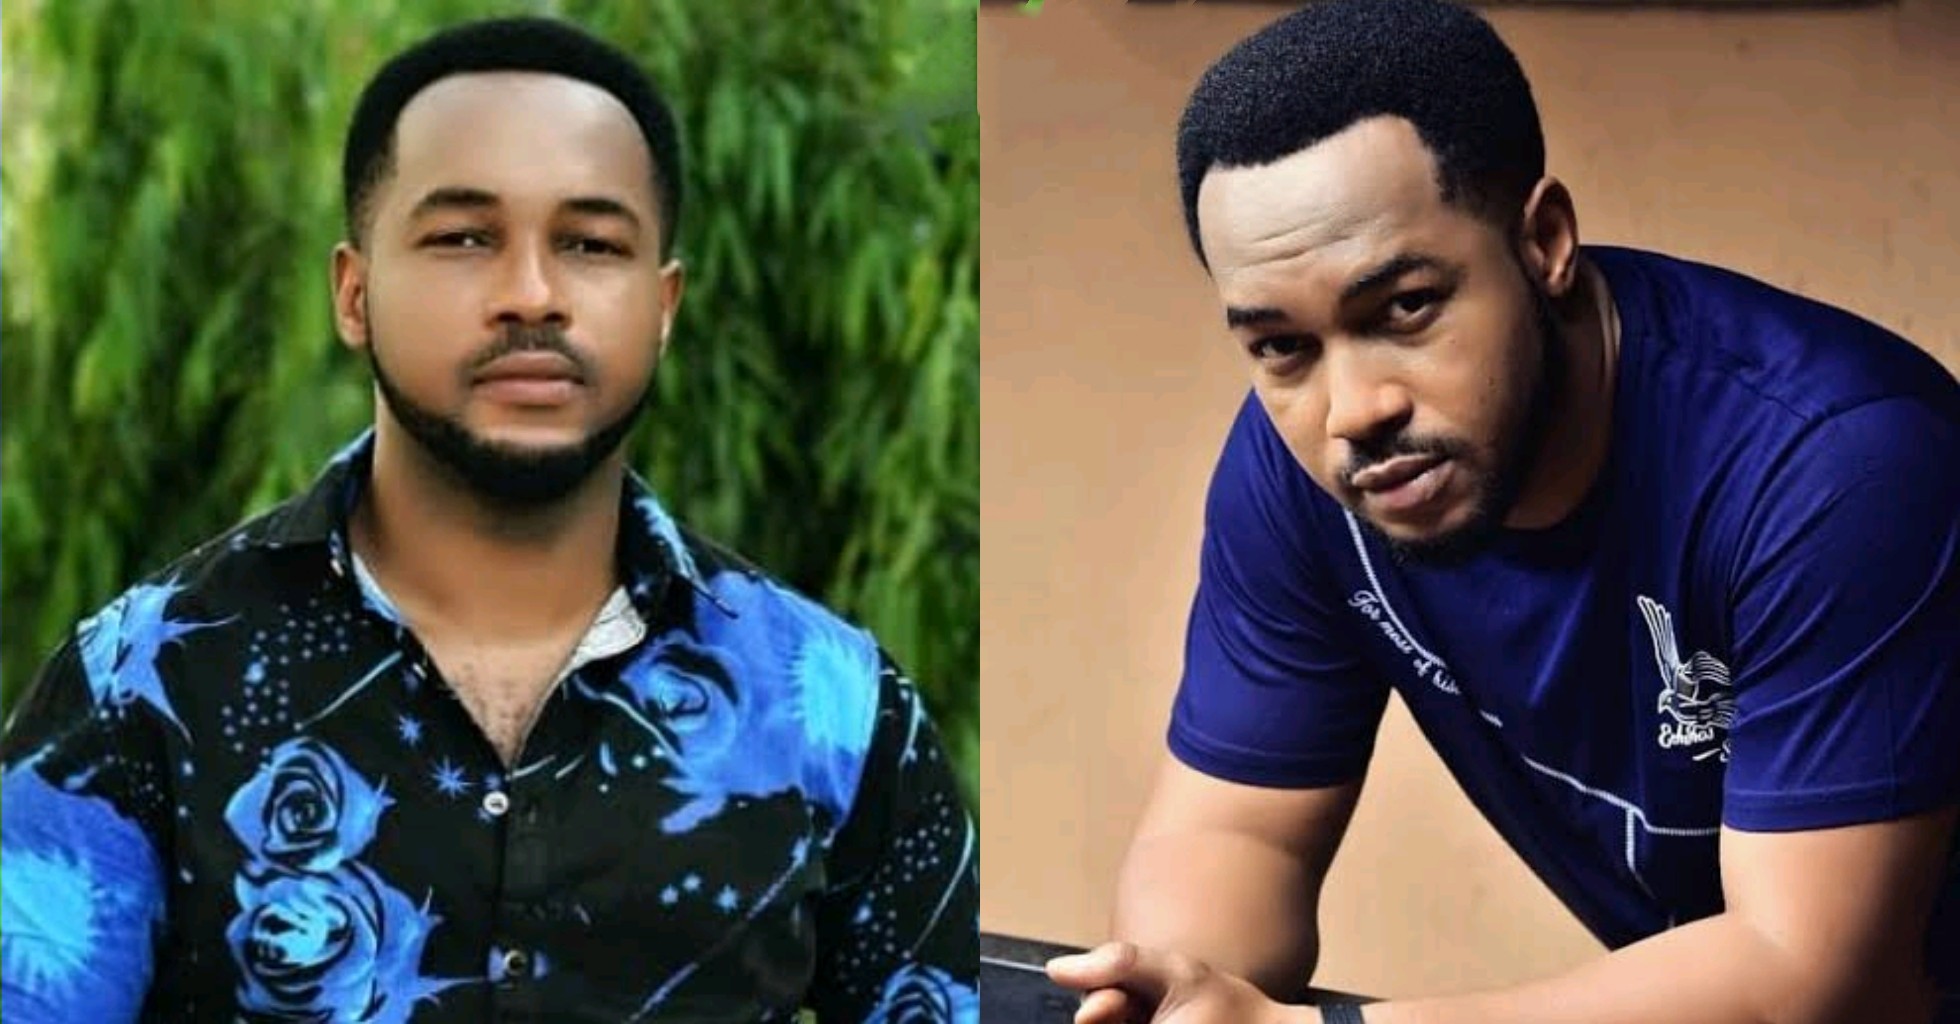 Nonso Diobi Biography: Wife, Birthday, Movies, Net Worth, House, Cars, Children, Pictures, Twin Brother, Girlfriend, Nonso Diobi Biography: Wife, Birthday, Movies, Net Worth, House, Cars, Children, Pictures, Twin Brother, Girlfriend